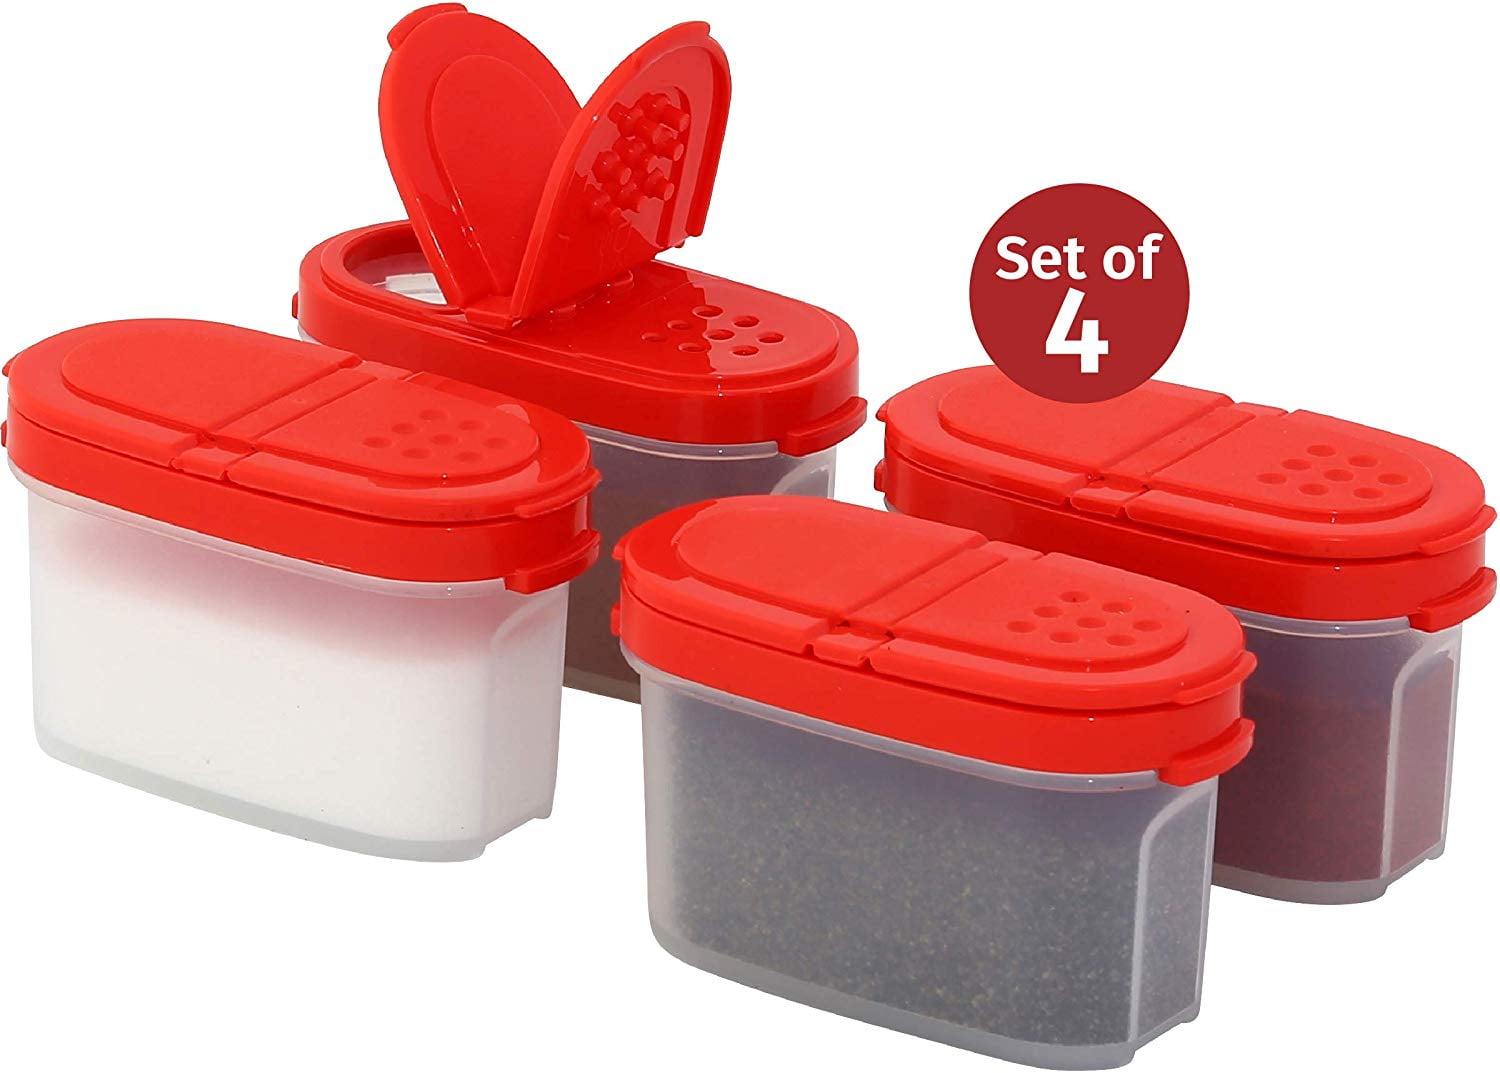 Small Mini Baby Food Kitchen Spice Pot Jars Containers Storage with Lids 